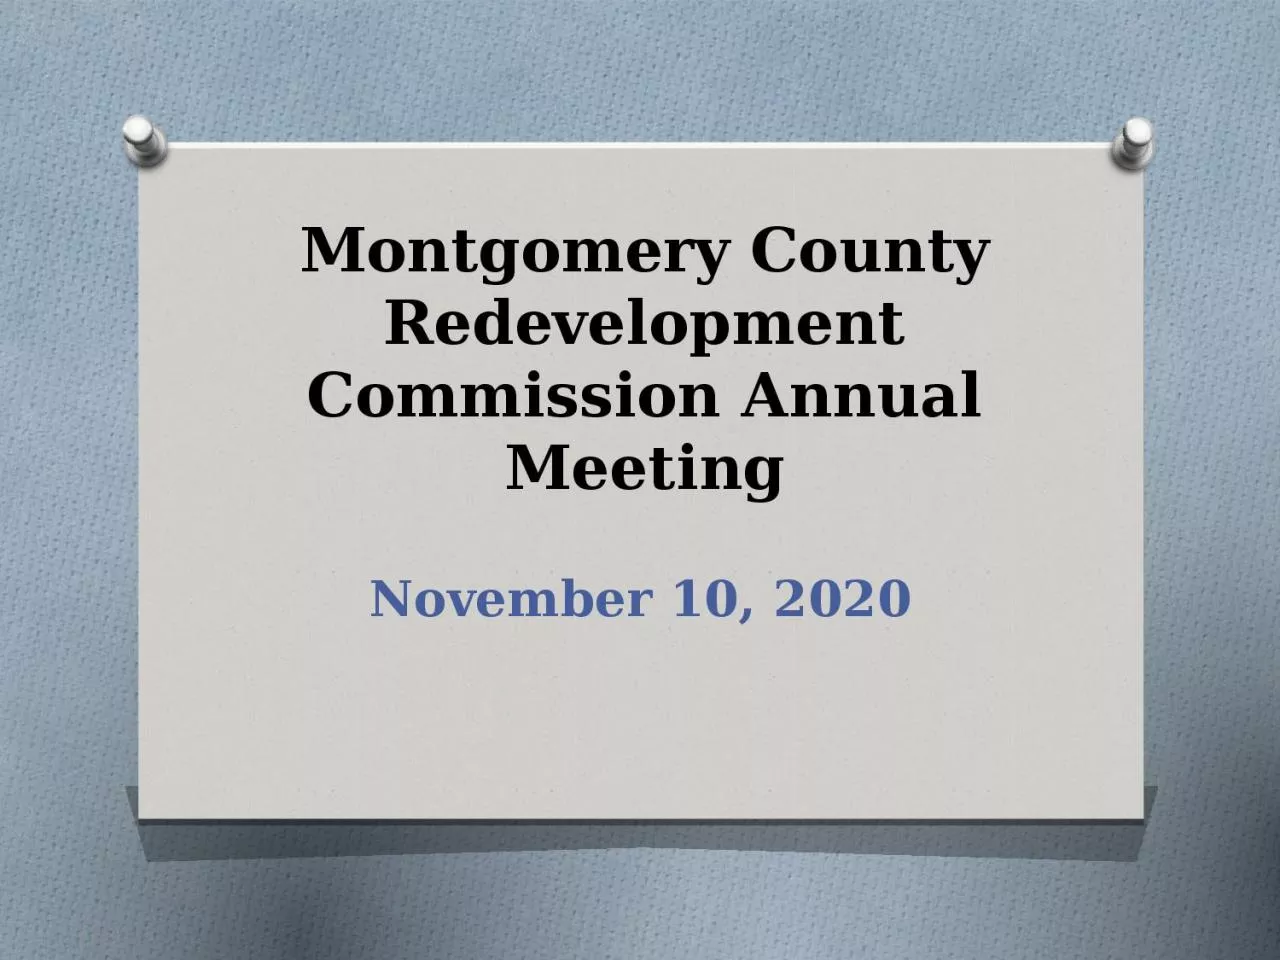 Montgomery County Redevelopment Commission Annual Meeting